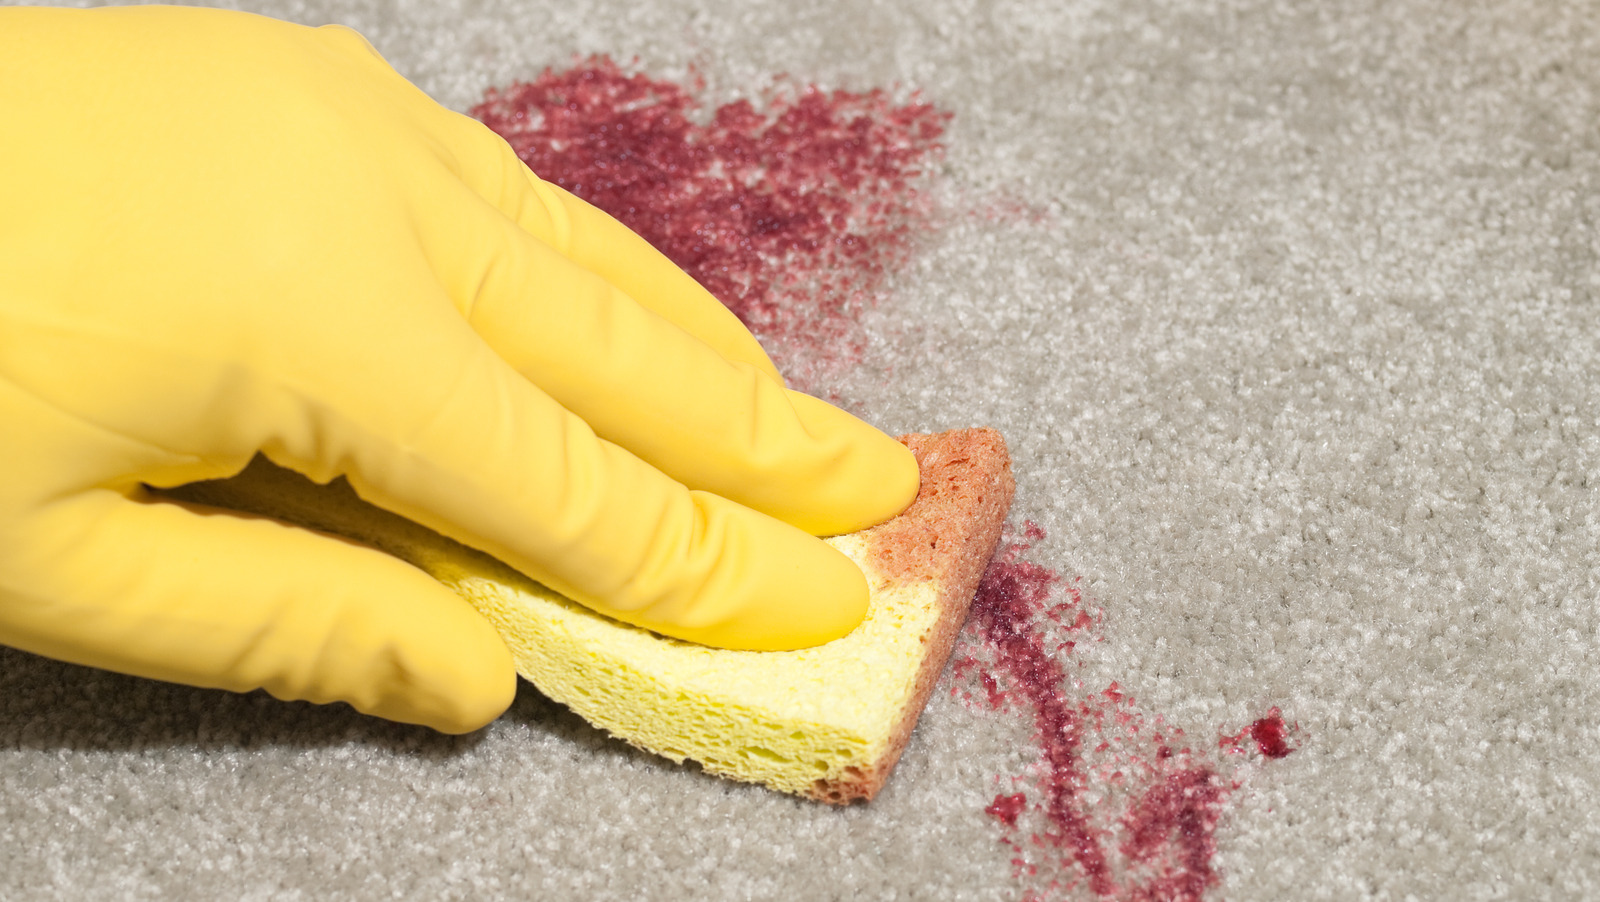 How to Get Blood Stains Out of Carpet